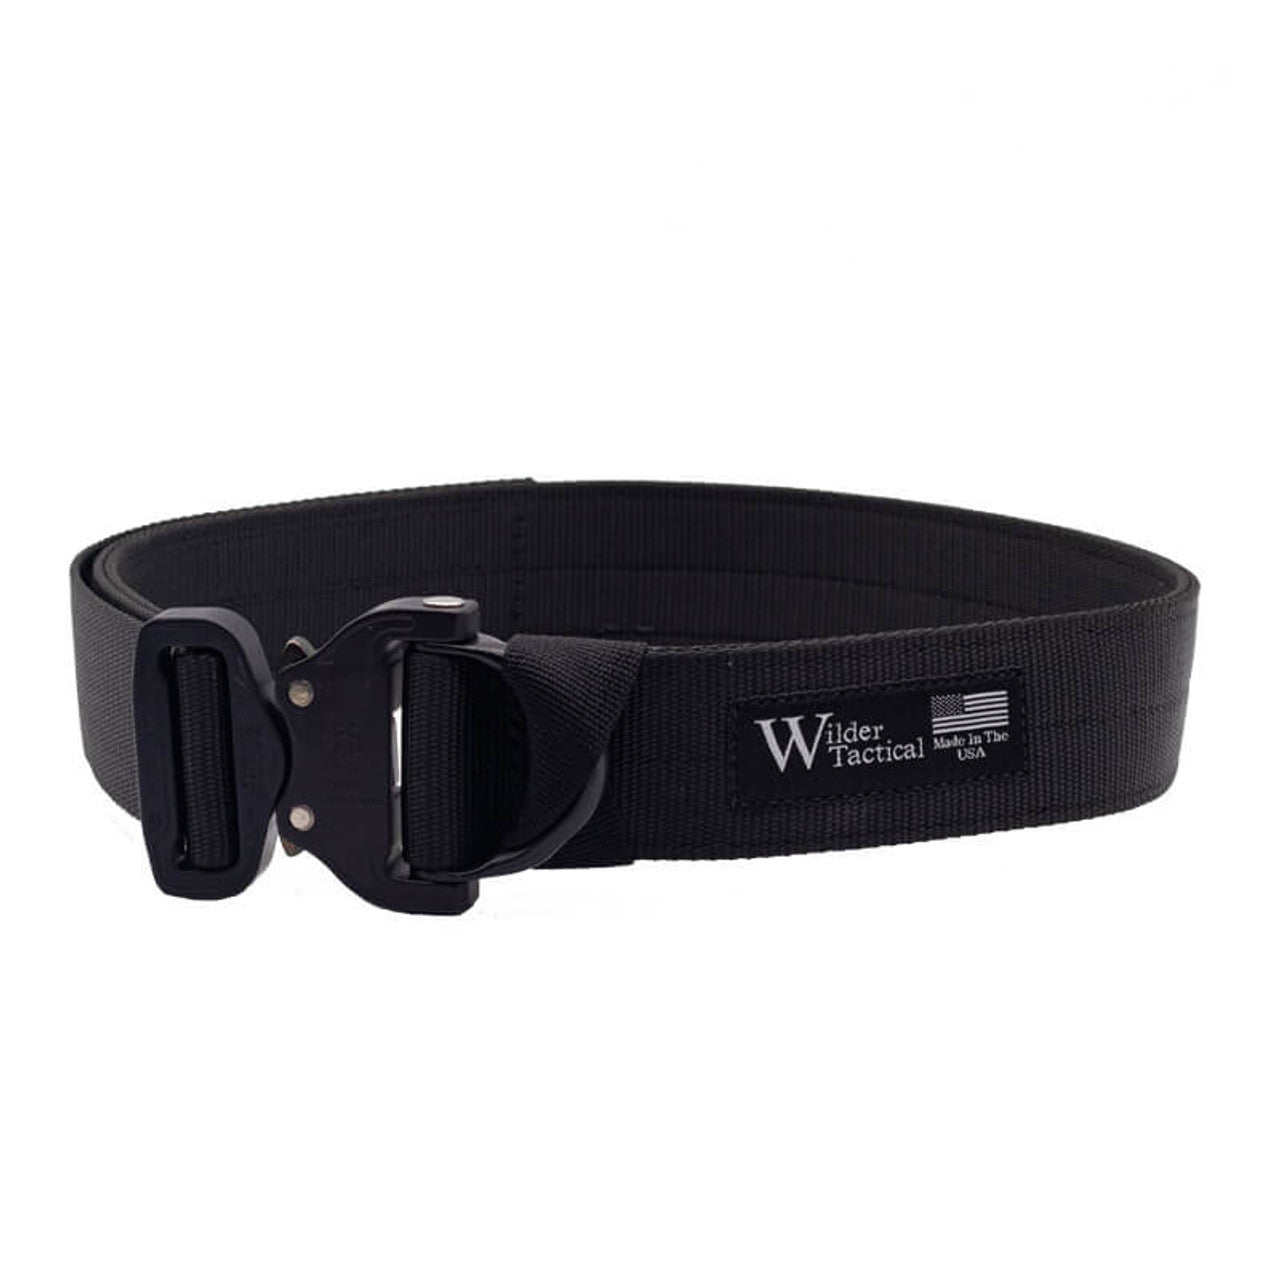 Wilder Tactical 1.75" Cobra Belt with Integrated D-Ring